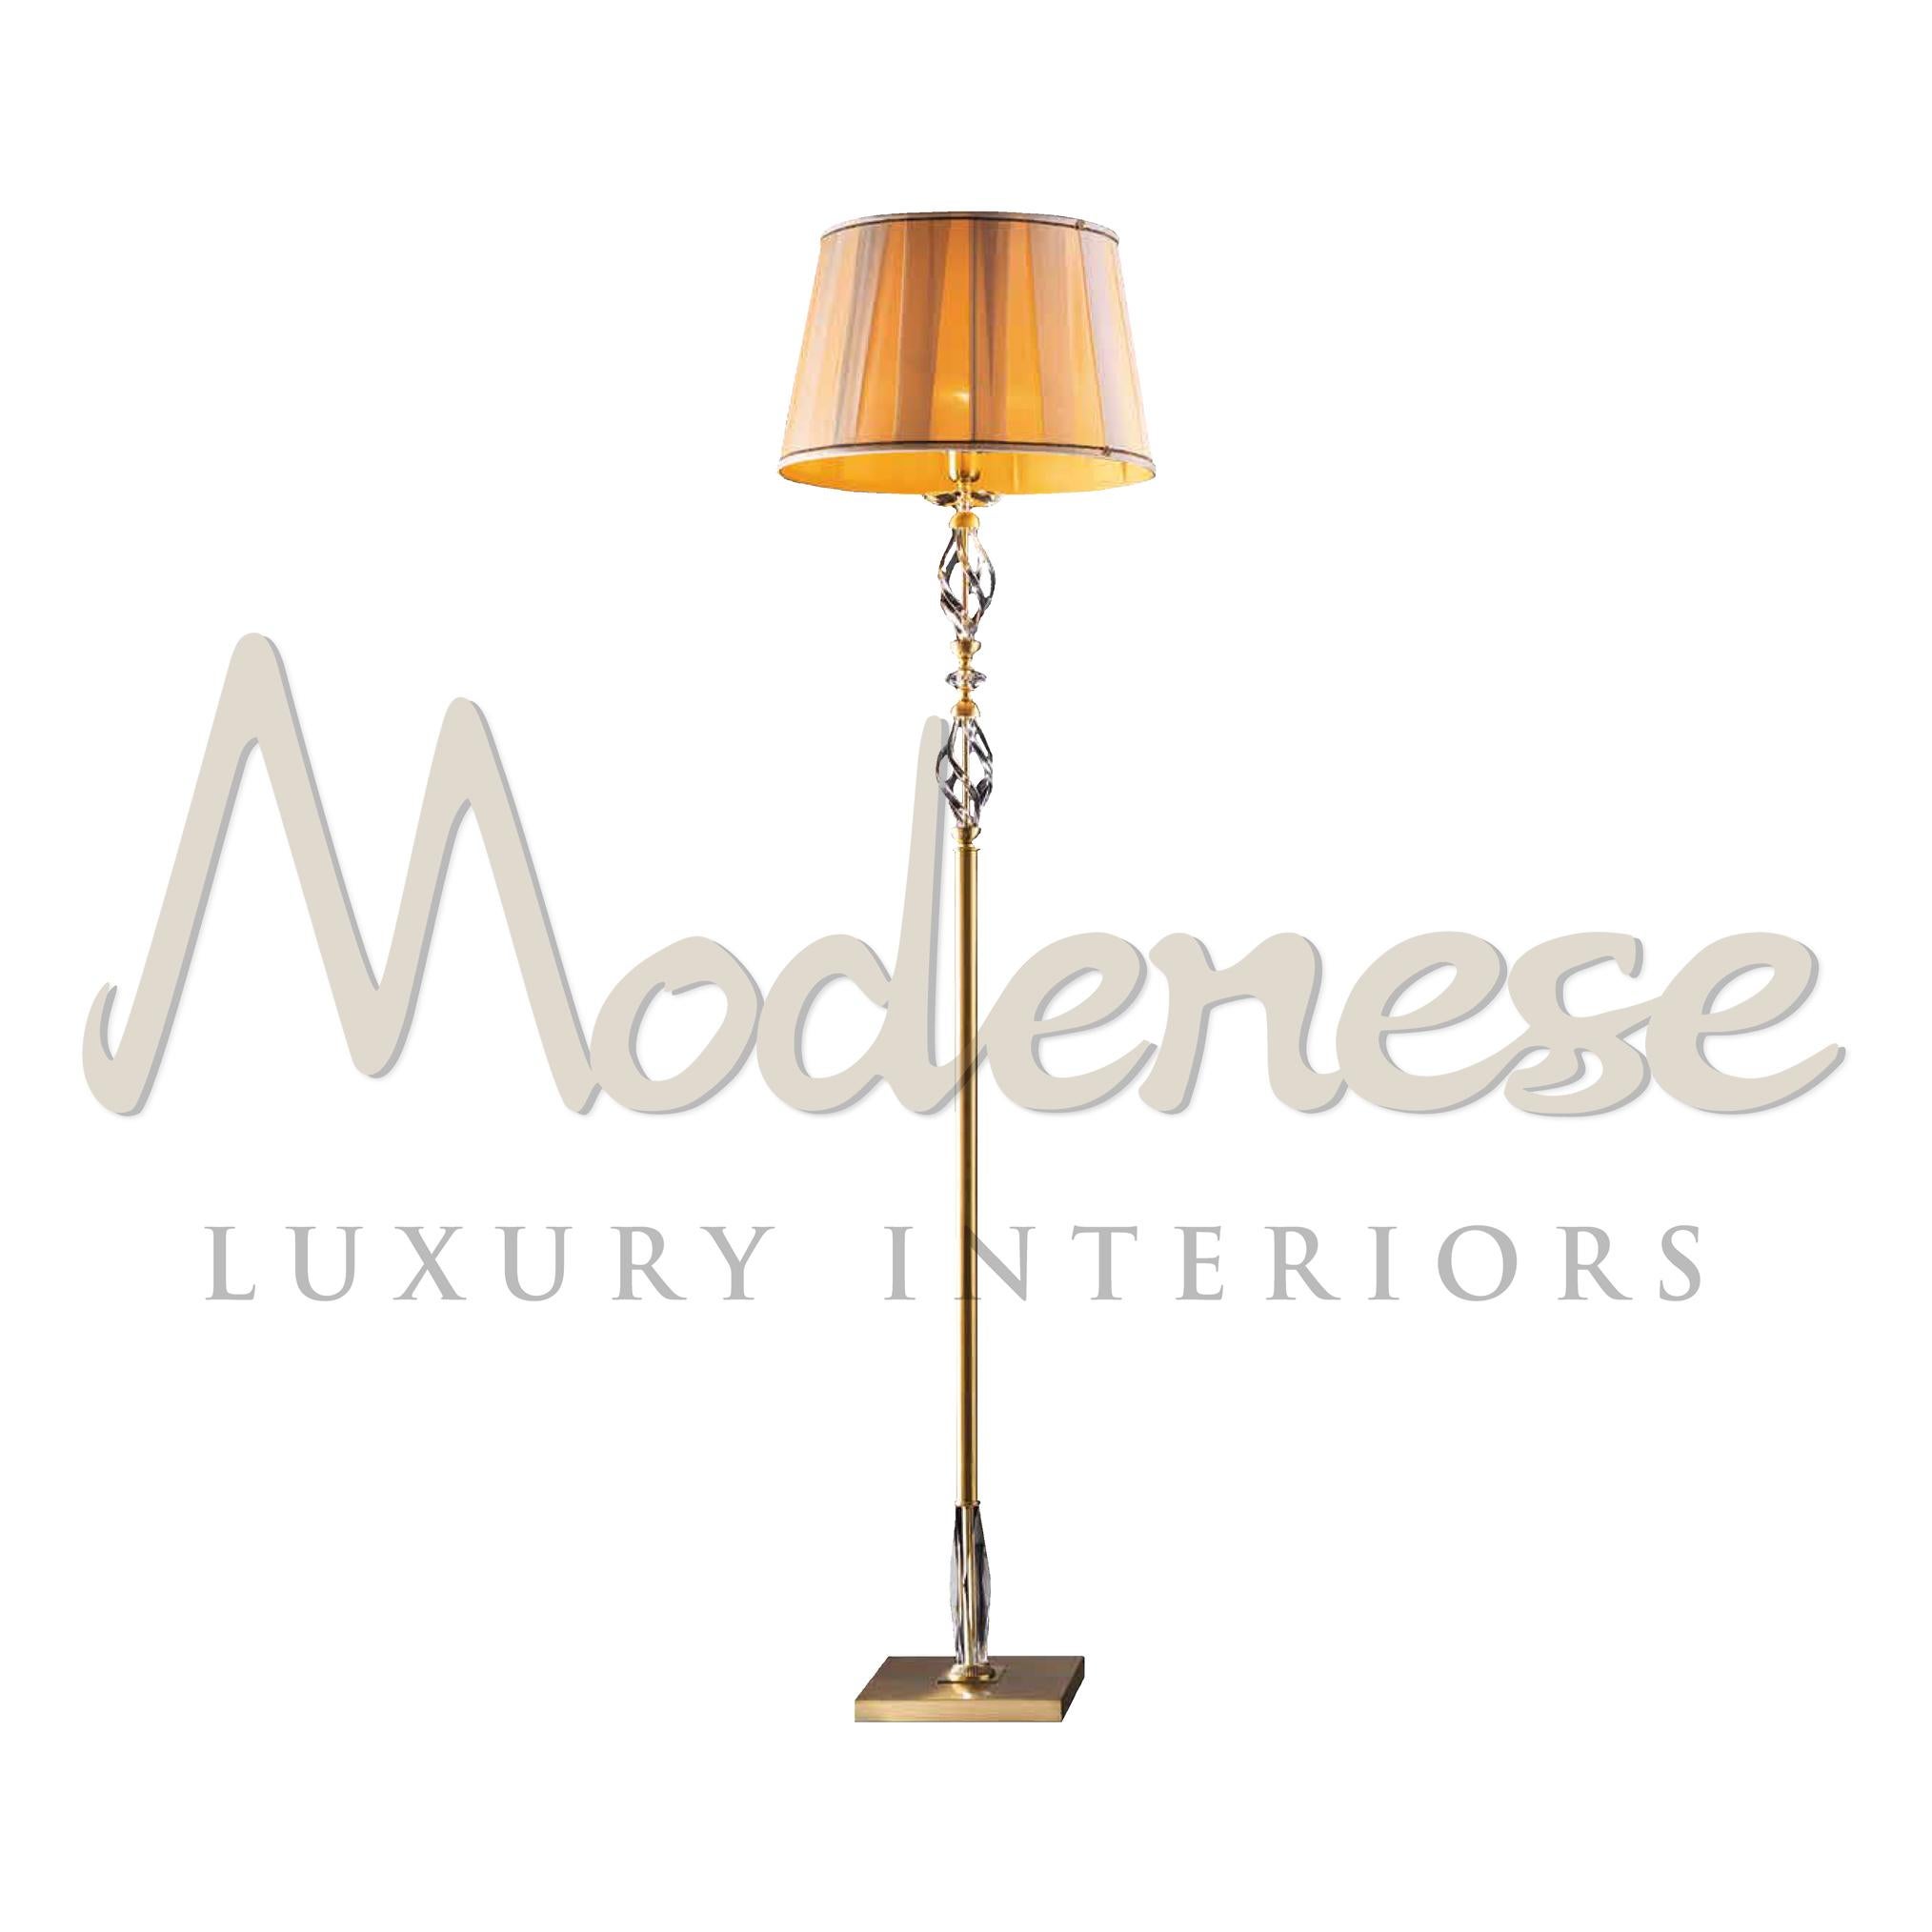 The Modenese Gastone luxury interiors floor lamps are based on the rococo' and baroque rich salons' ancient inspirations style. Fusing metal finishing in satin gold, transparent crystal and lampshade this model is an exclusive piece. This model